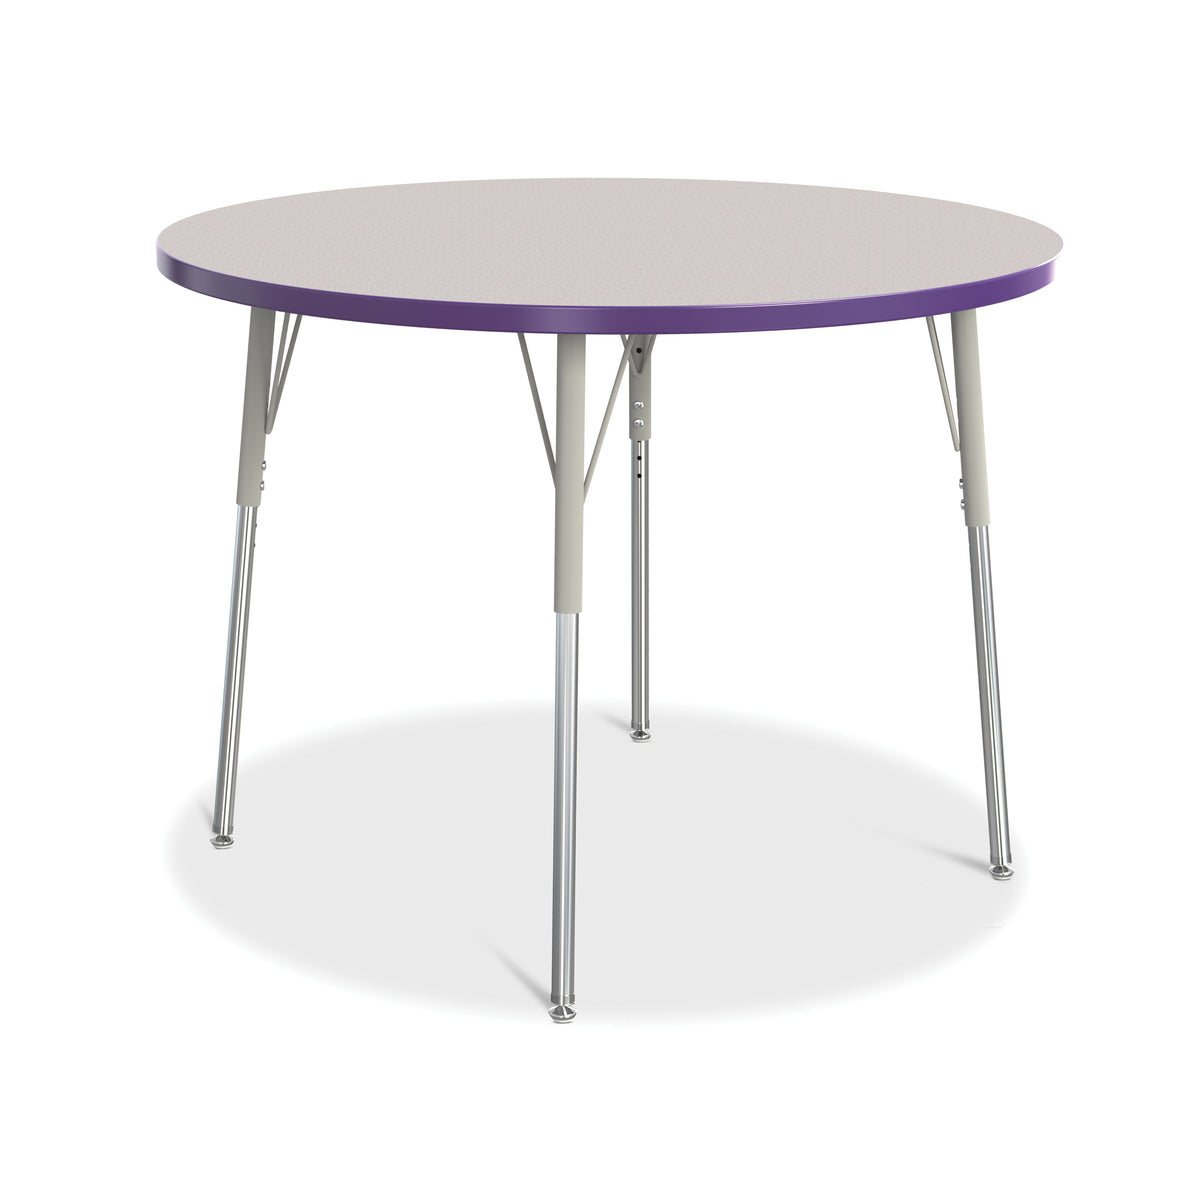 6468JCA004, Berries Round Activity Table - 42" Diameter, A-height - Freckled Gray/Purple/Gray